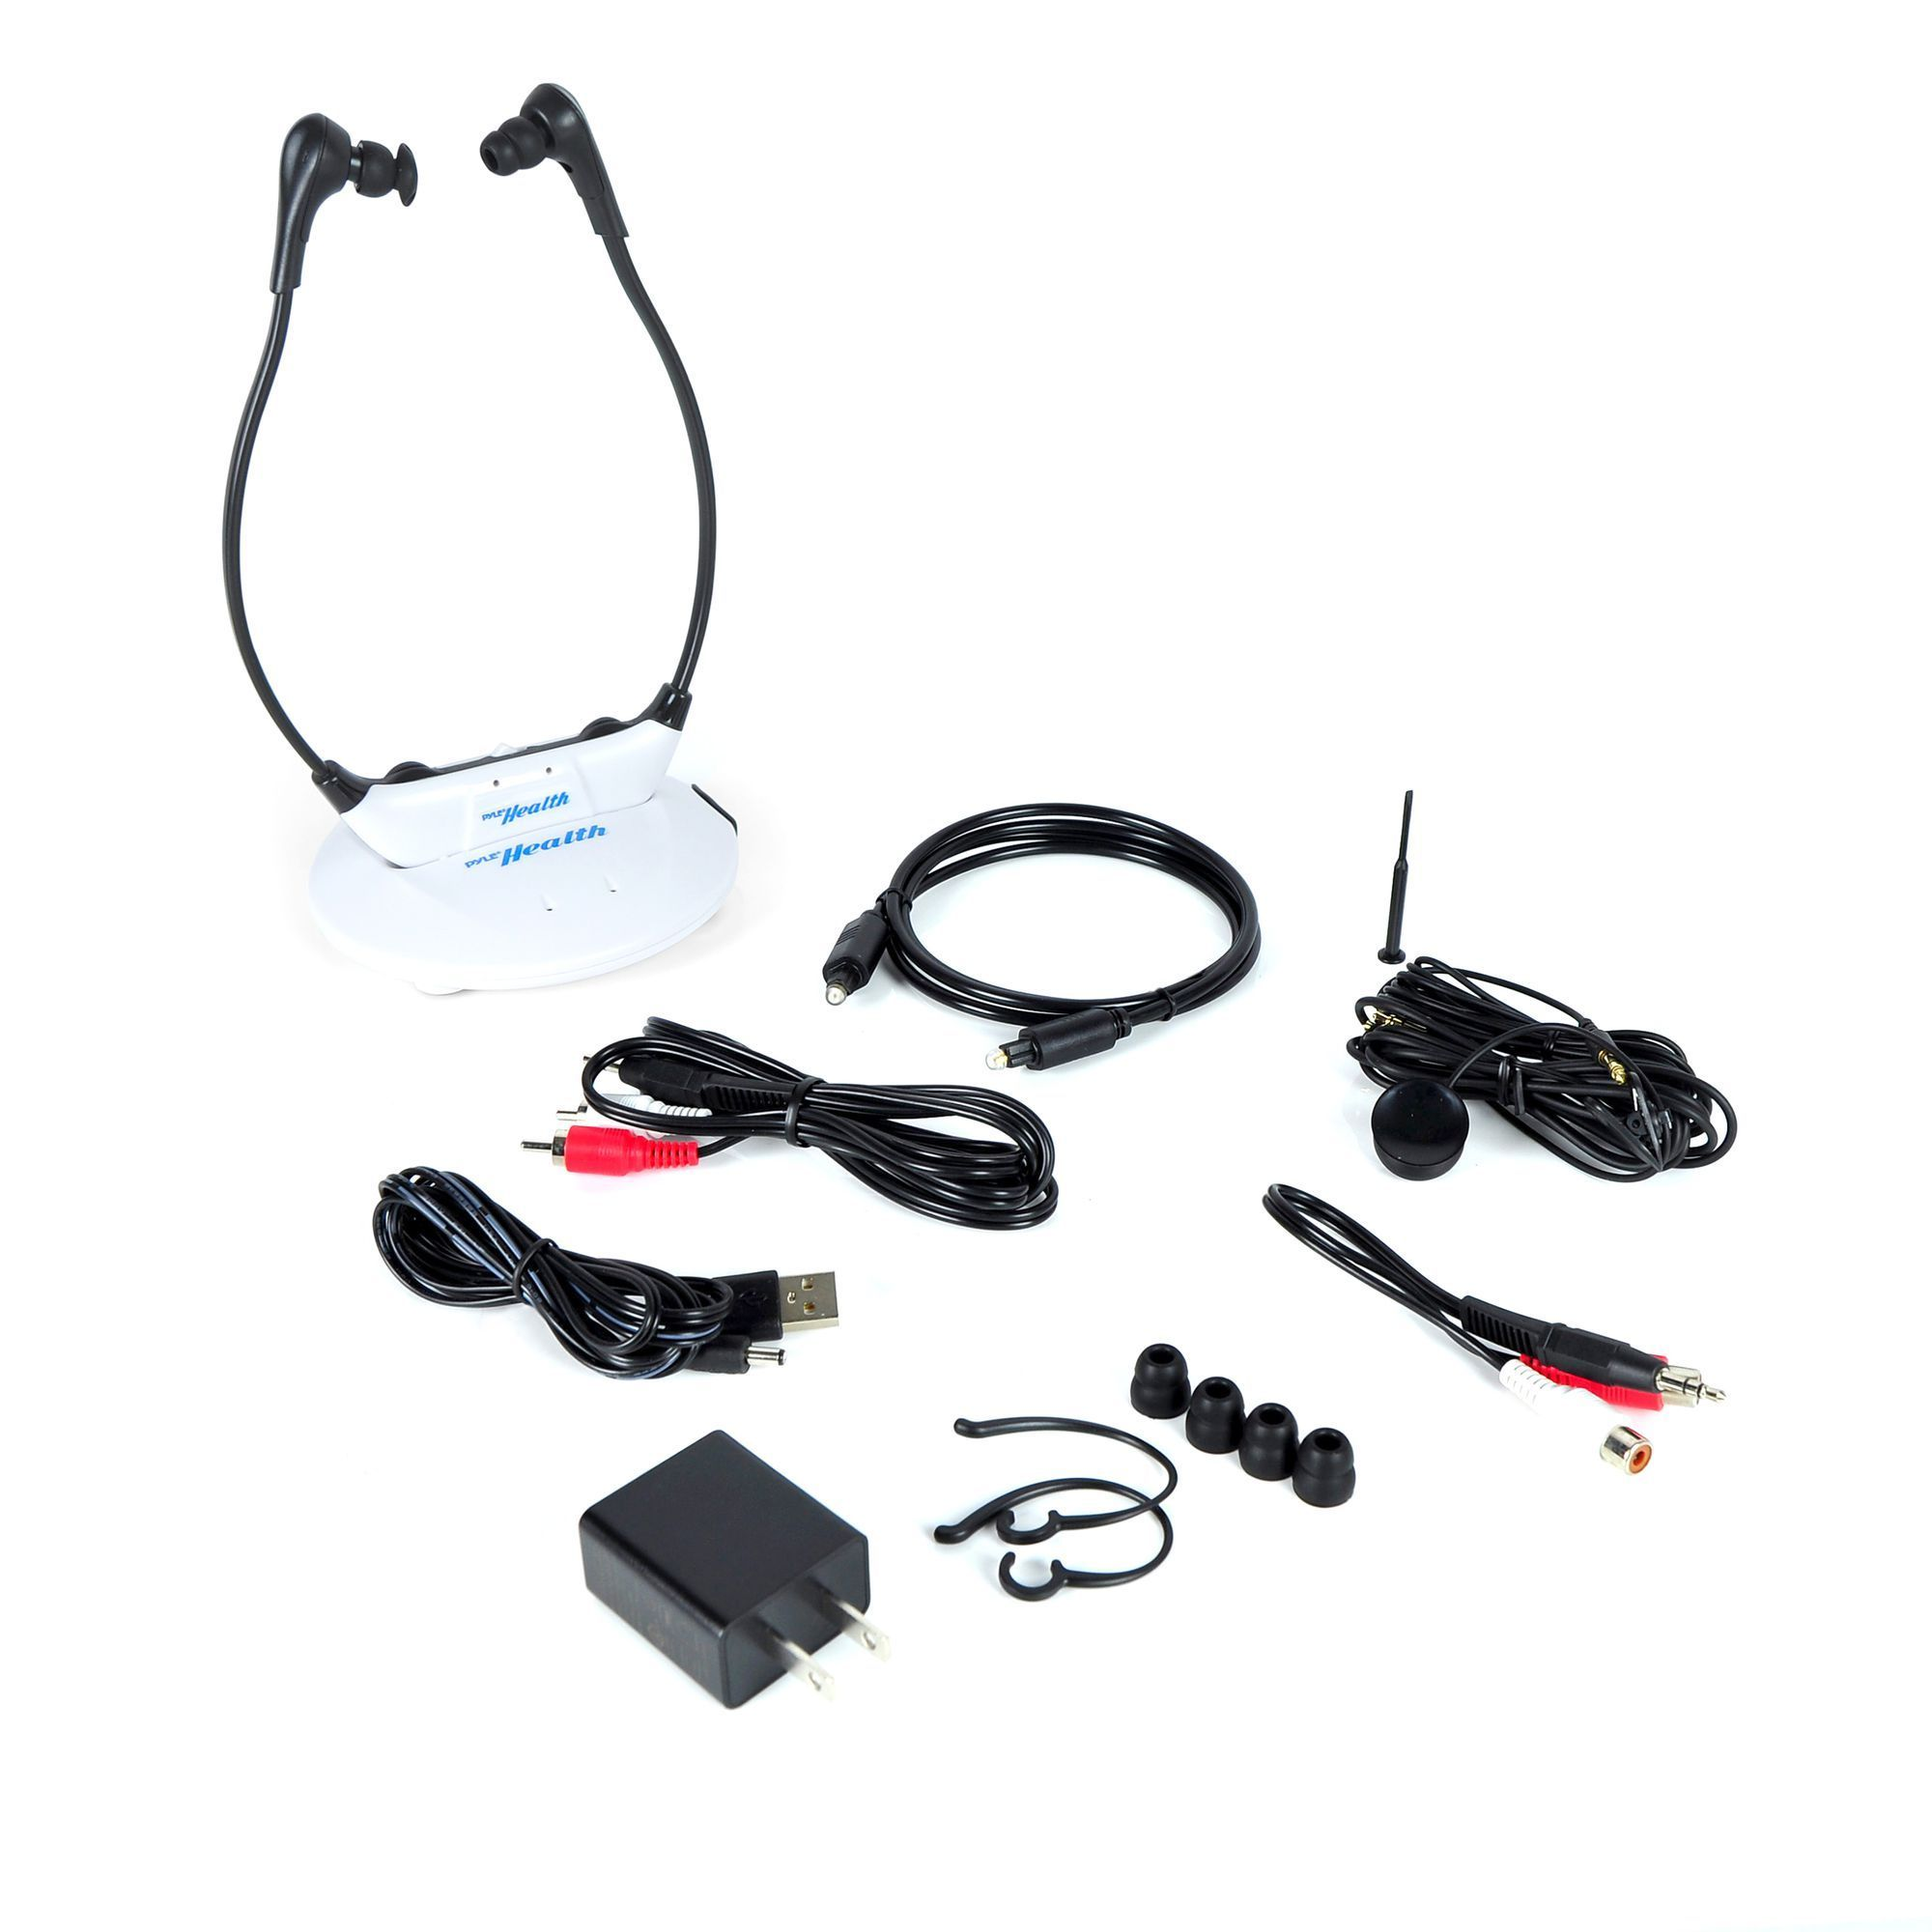 Pyle Bluetooth Hearing Amplifier Headset, Noise-Cancelling, Rechargeable Battery, 50' ft Wireless Range, (PHPHA78)